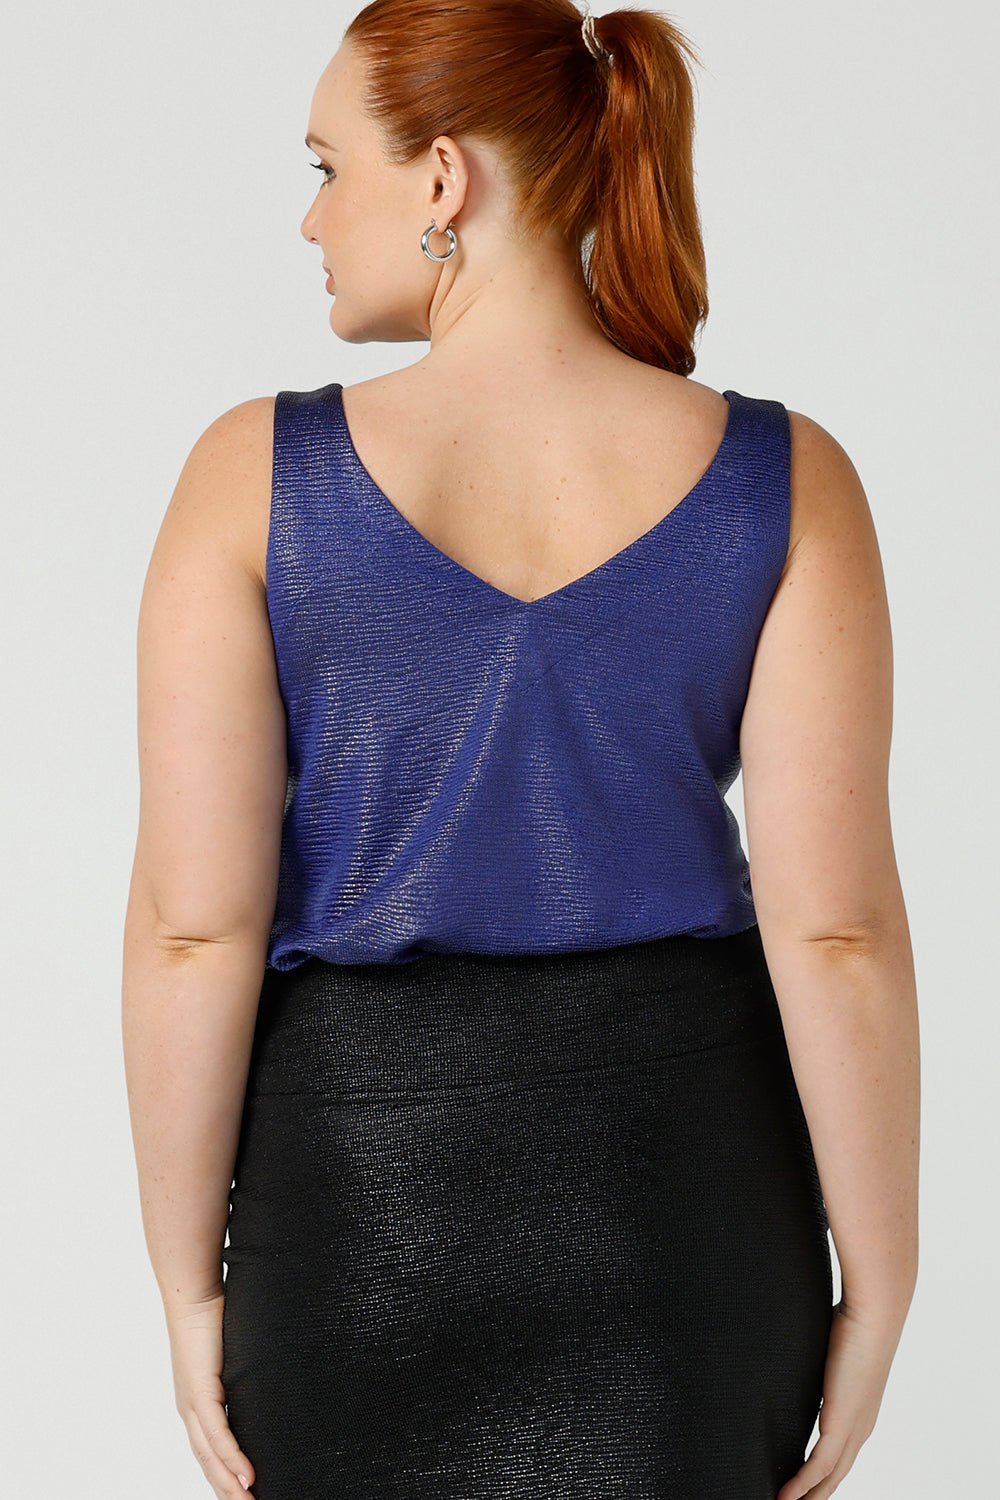 Back view of a size 12, fuller figure woman wearing a cobalt Xanadu cami top with wide shoulder straps. Made in Australia by Australian and New Zealand women's clothing company, this shimmer jersey top wears well with evening and occasion-wear skirts, pants and suit jackets.